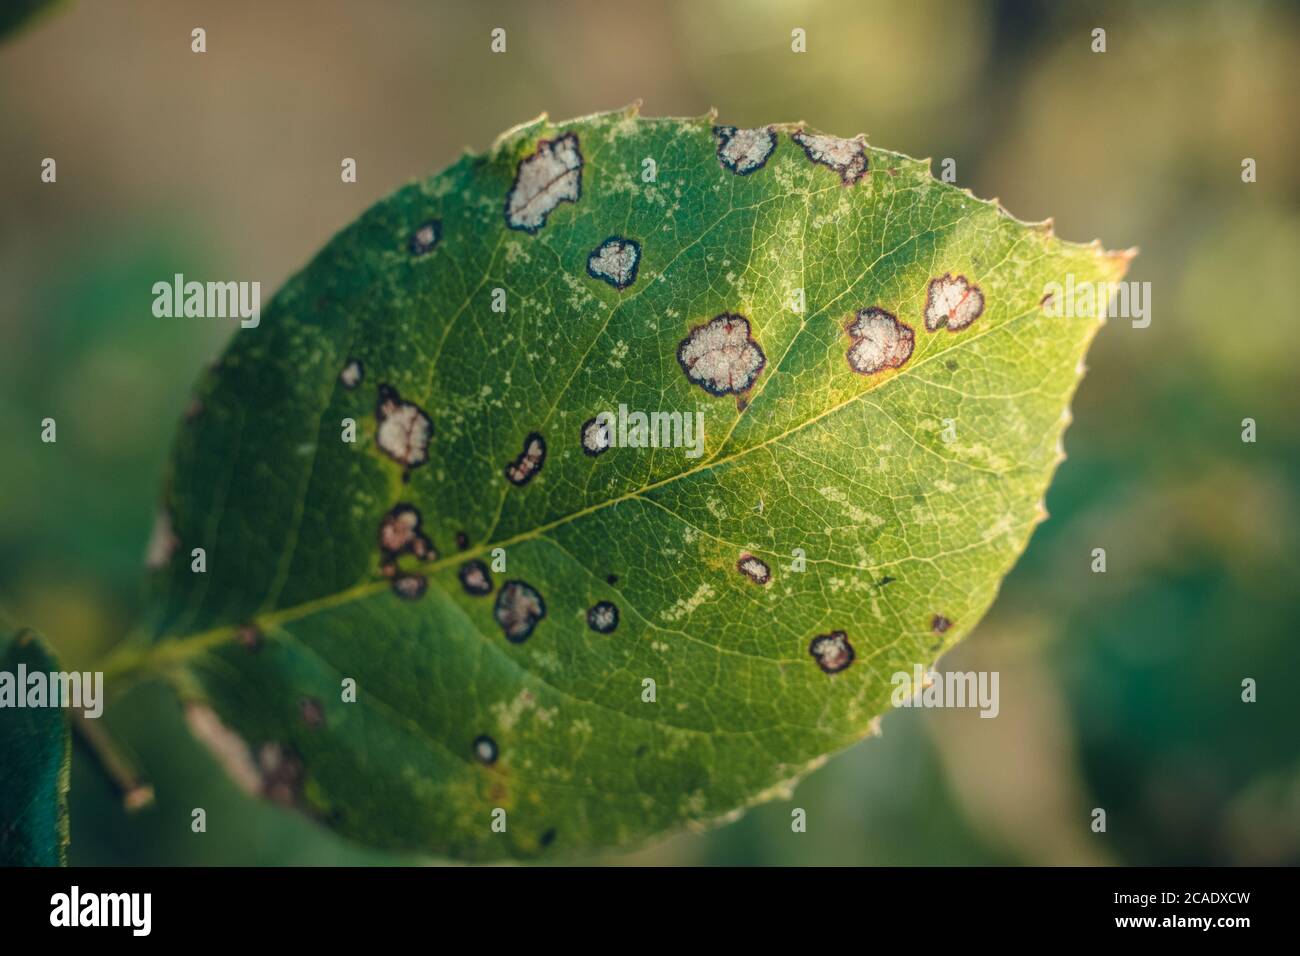 Disease damaged leaf of rose with white spots bordered with dark color Stock Photo